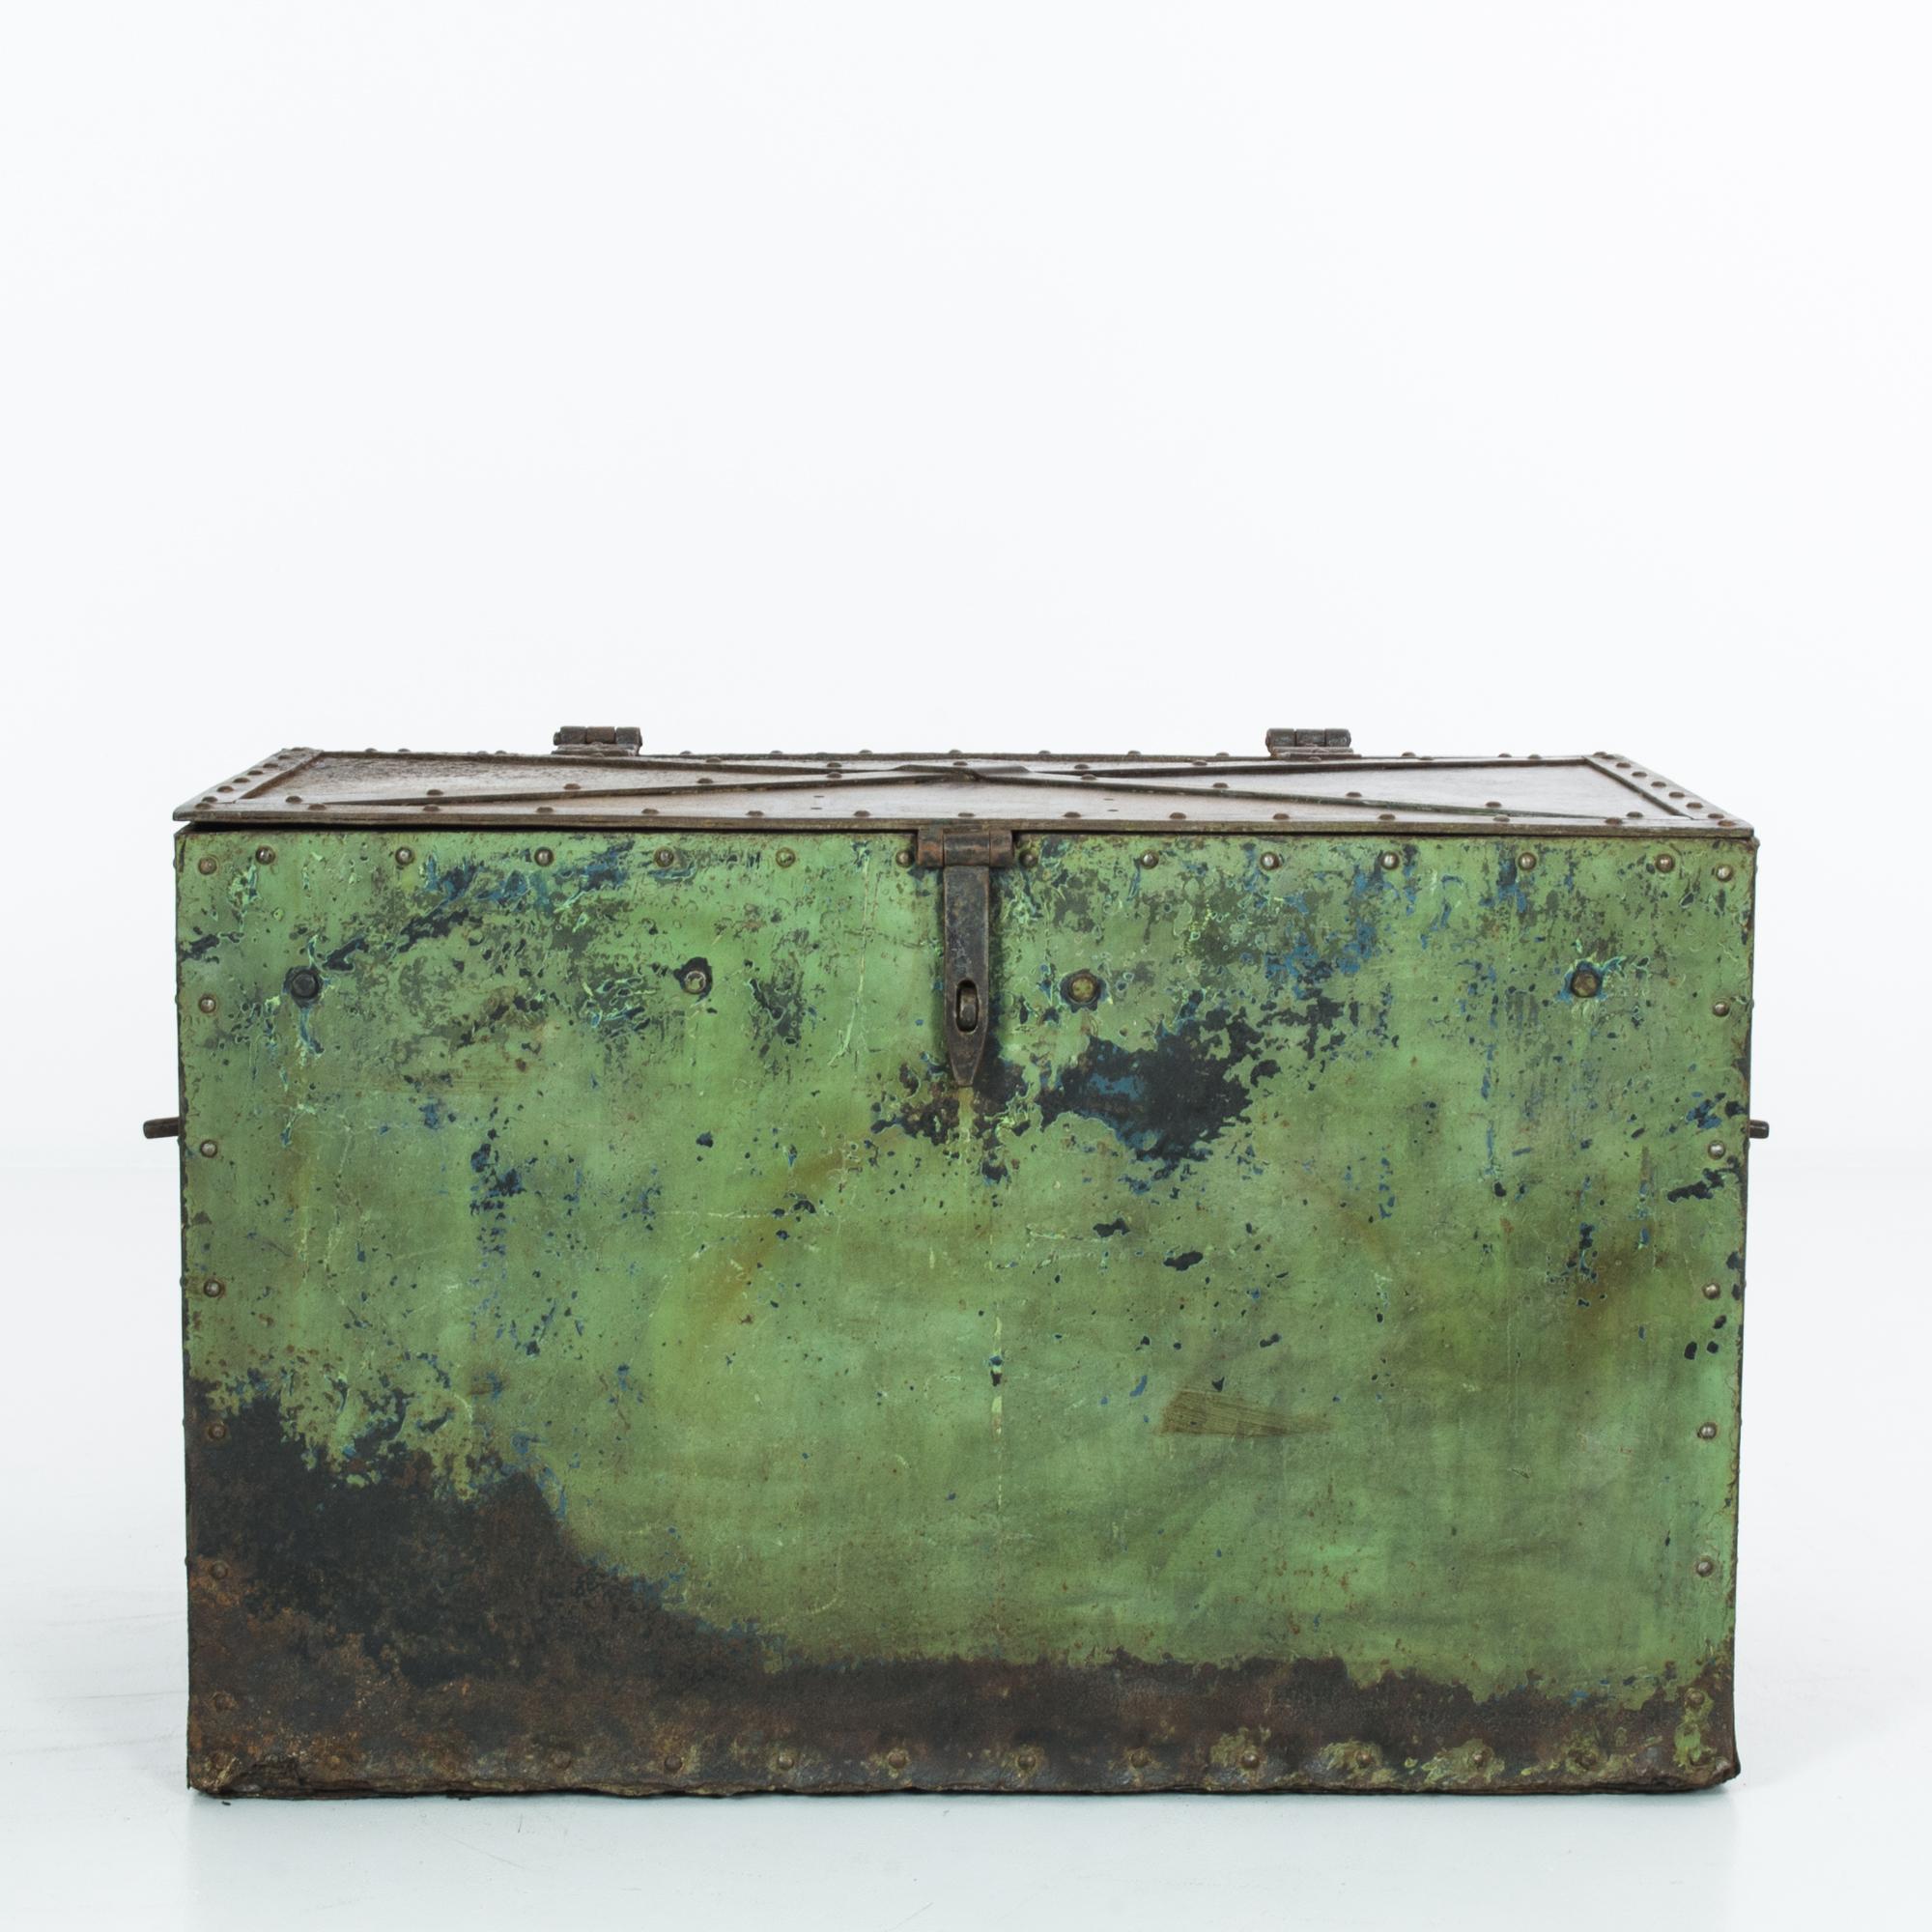 A metal trunk from Central Europe, produced circa 1900. A riveting old world antique, this metal trunk features its original hinges, handles, and hasp with a stunning oxidized patina layered with complimentary blue and green. A remarkable find, this